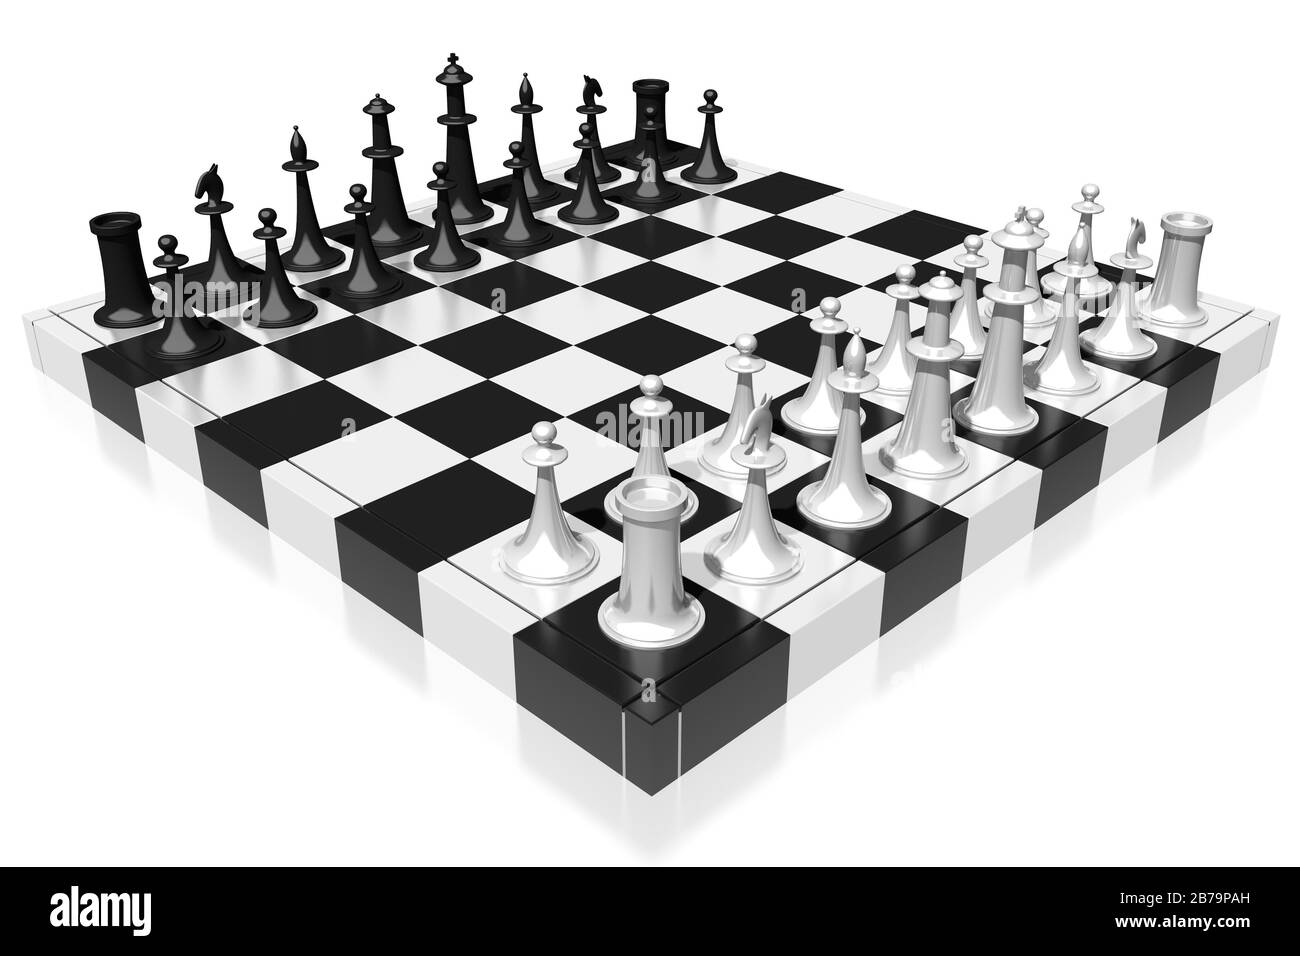 Chess Board 3d Stock Photos and Images - 123RF